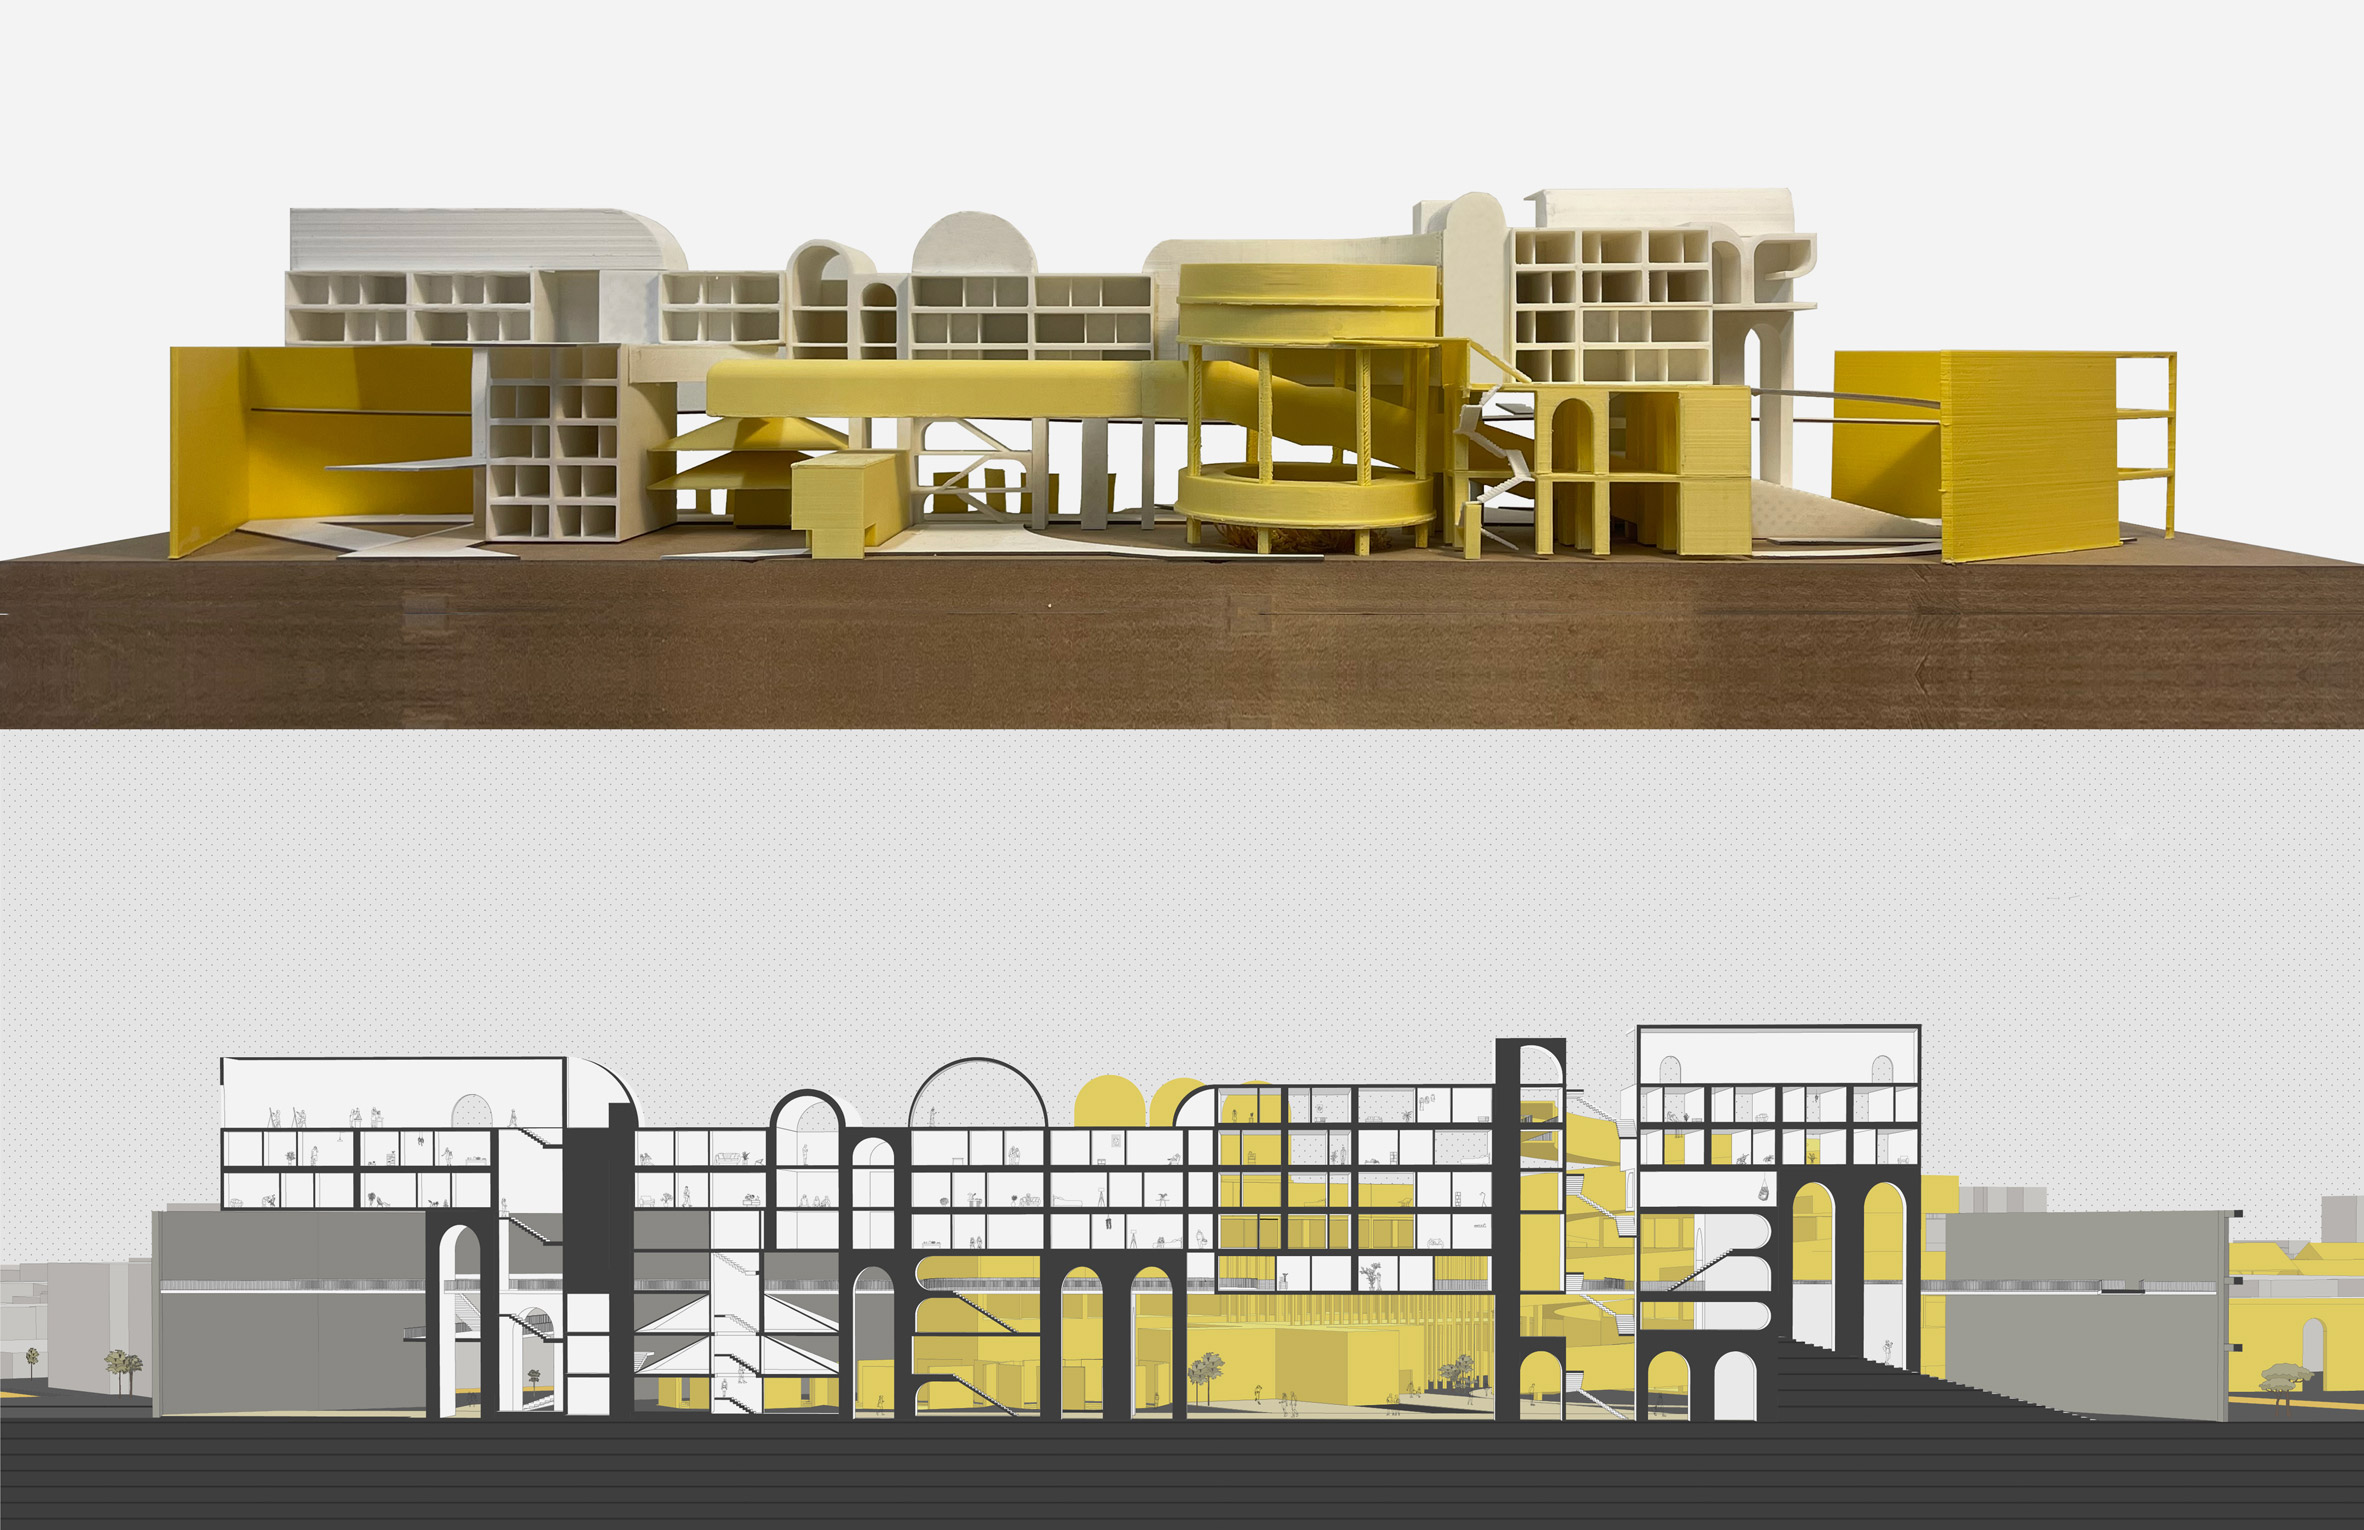 Model and cross sectional view of a large mixed-use centre, both with yellow details